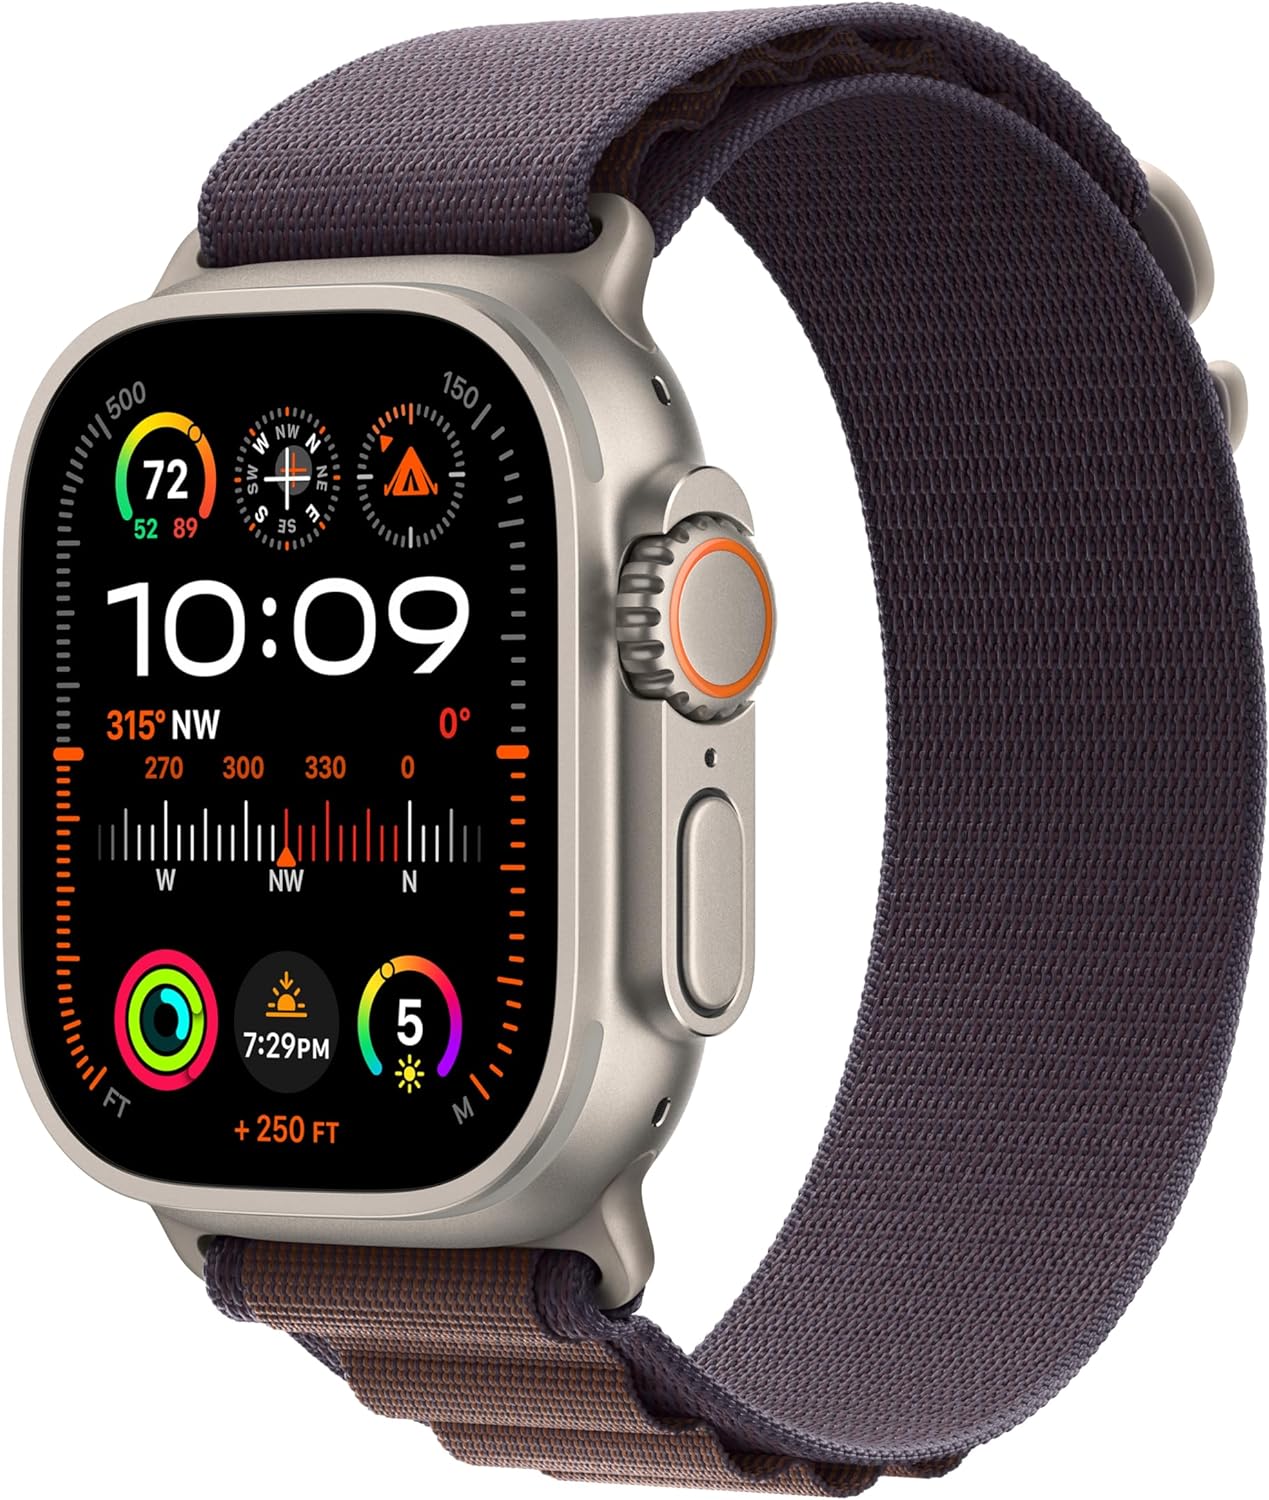 Apple Watch Ultra 2 Review: The Ultimate Smartwatch for Active Individuals